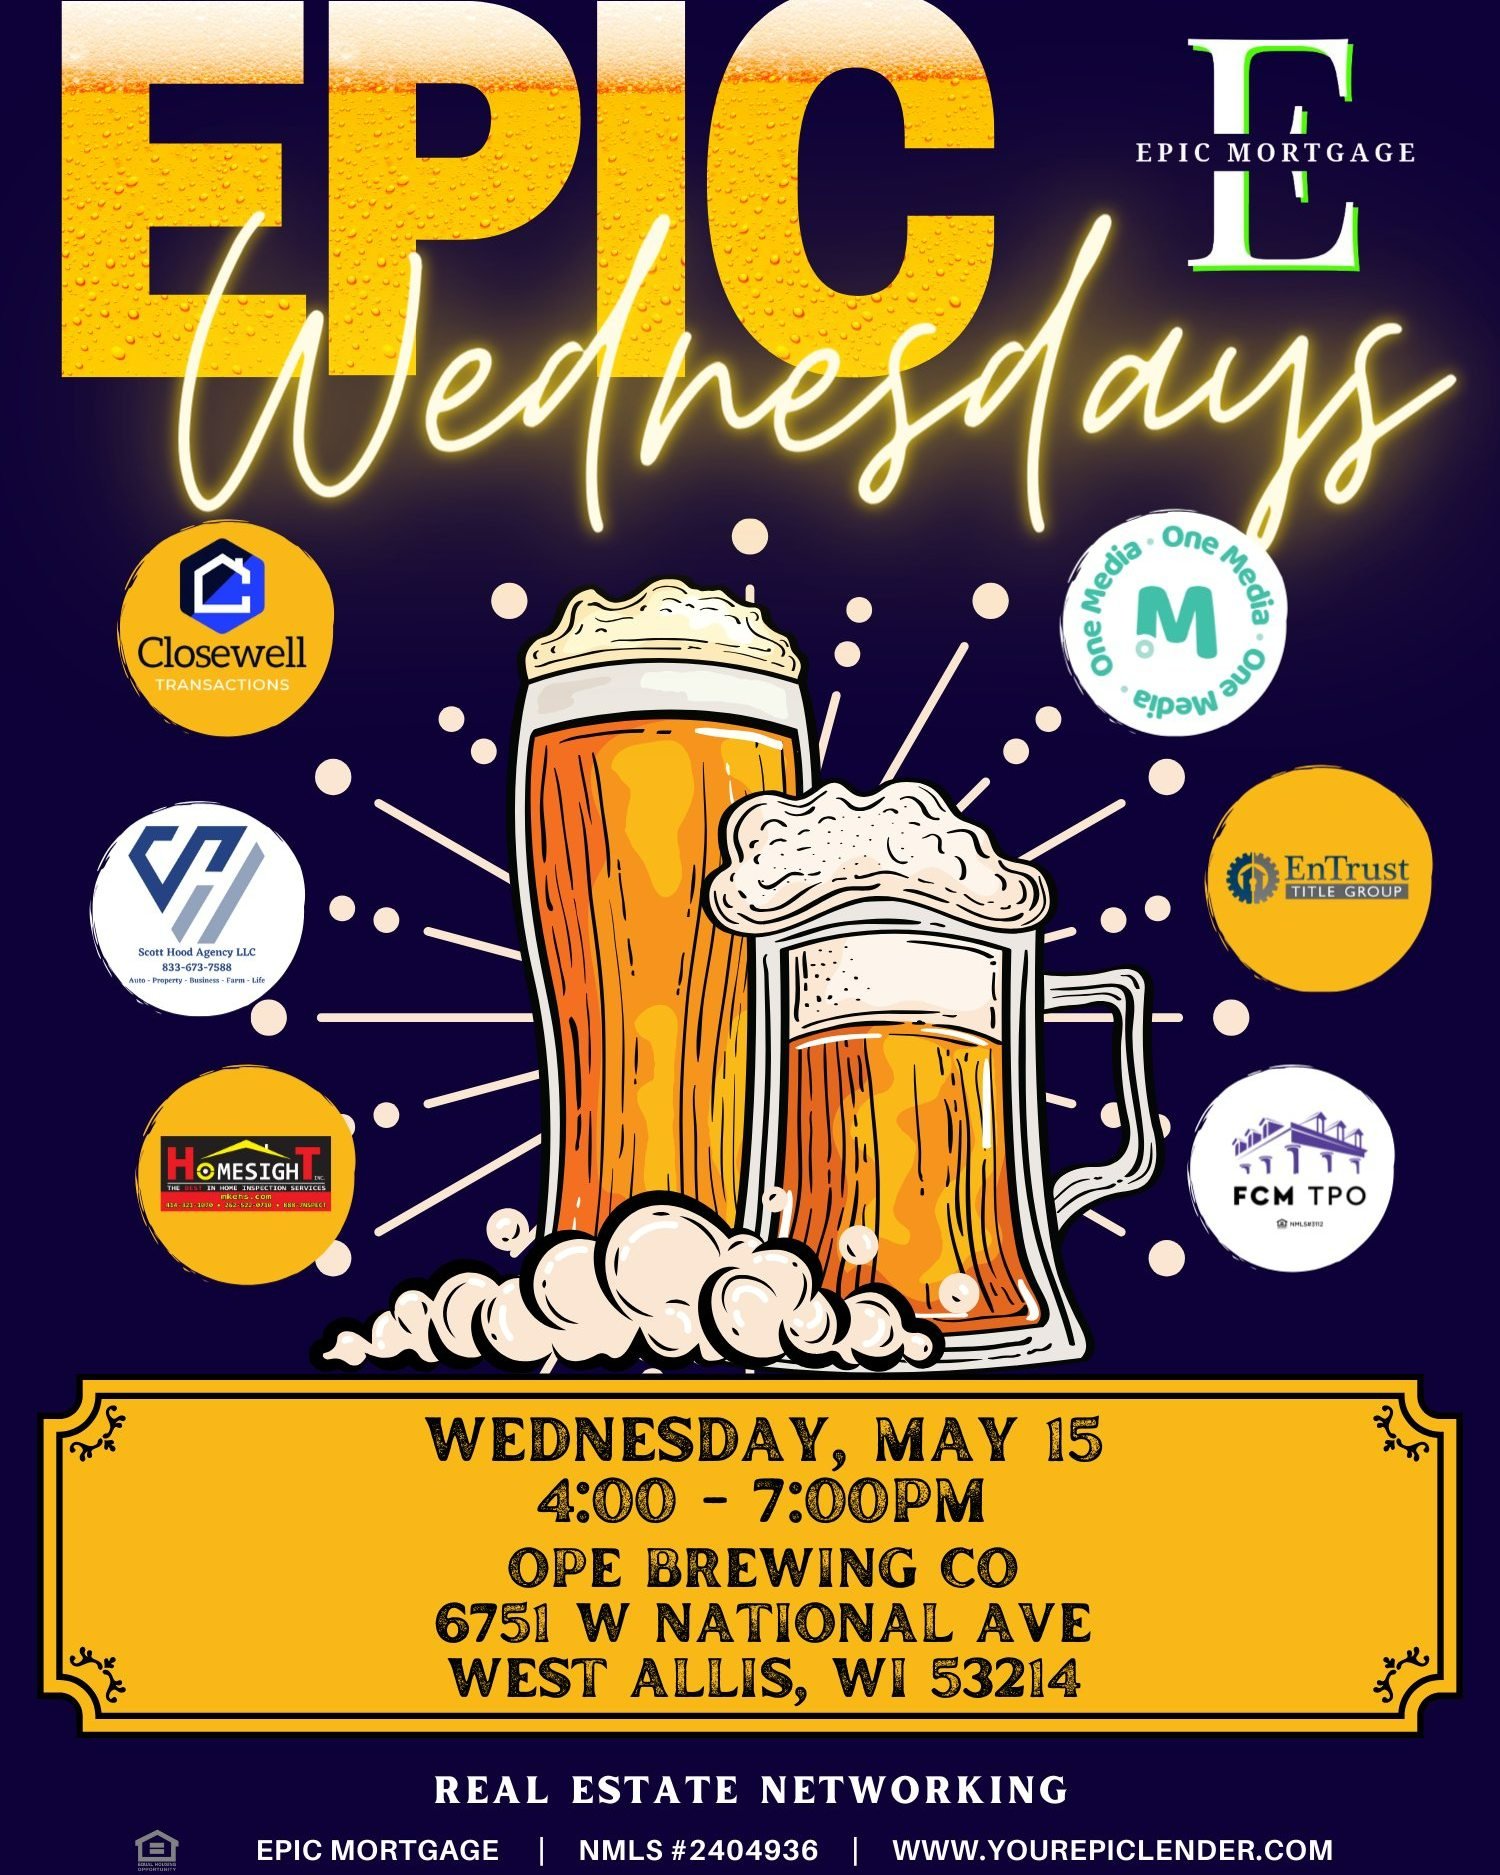 🍻Epic Wednesday is TOMORROW!🍻

We hope to see you at Ope tomorrow for Epic Wednesday before we take a break for the summer!  Let us know if you plan to join us for some Epic networking!

https://bit.ly/epicwednesdaymay2024

You'll also get to see o